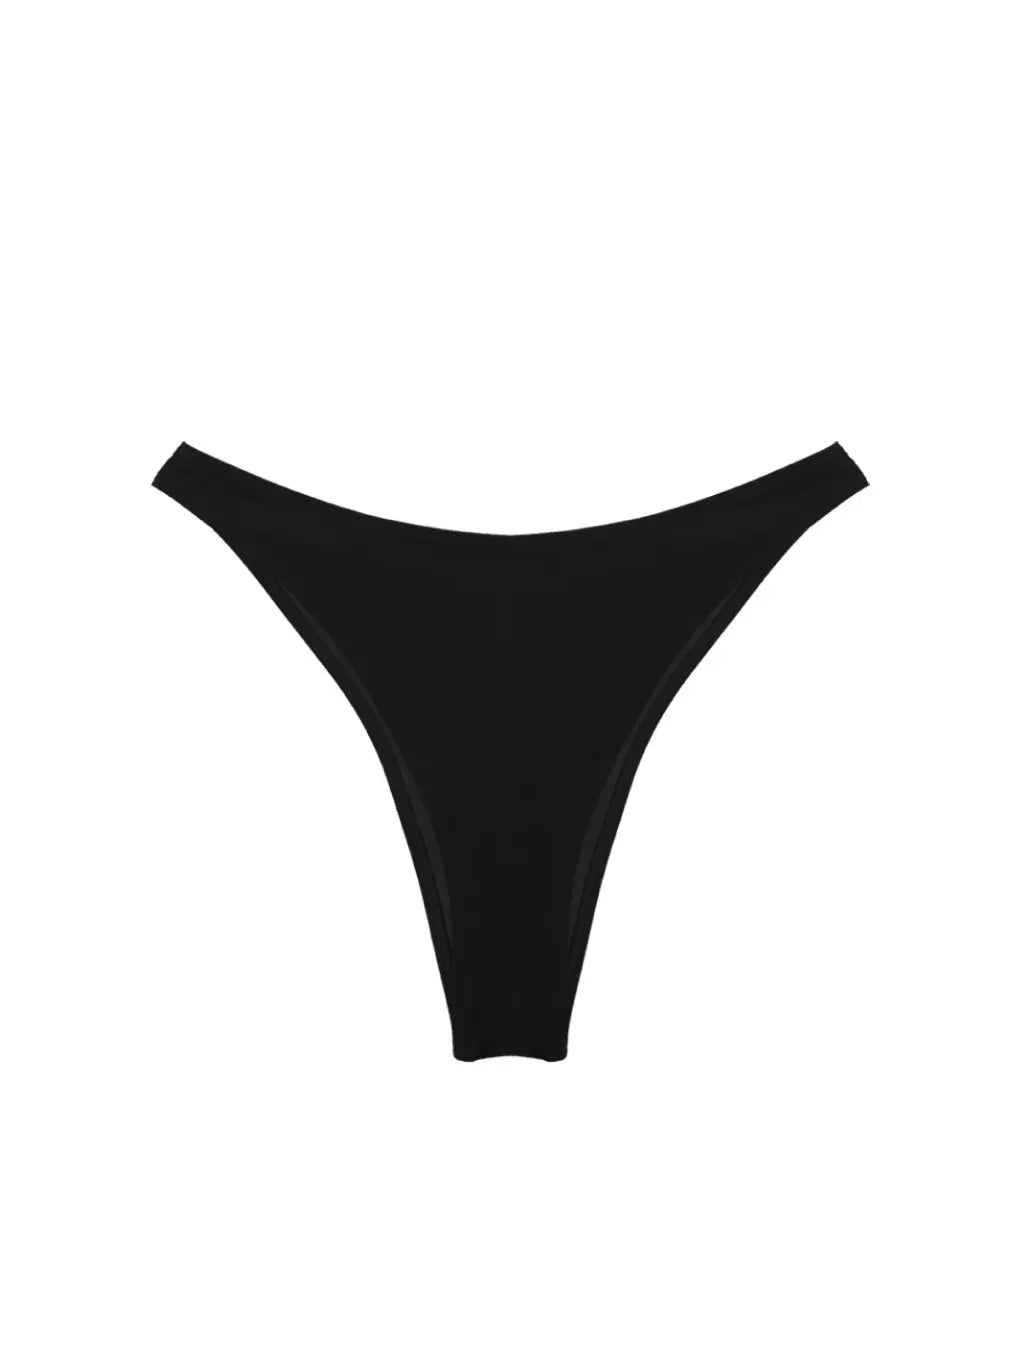 A high-waisted, black thong-style underwear with a simple and sleek design is displayed against a plain white background. The fabric appears smooth and stretchy, designed for minimal coverage and a comfortable fit. Find this elegant Trentotto Black Bikini Bottom by Lido exclusively at bassalstore, your go-to store in Barcelona.